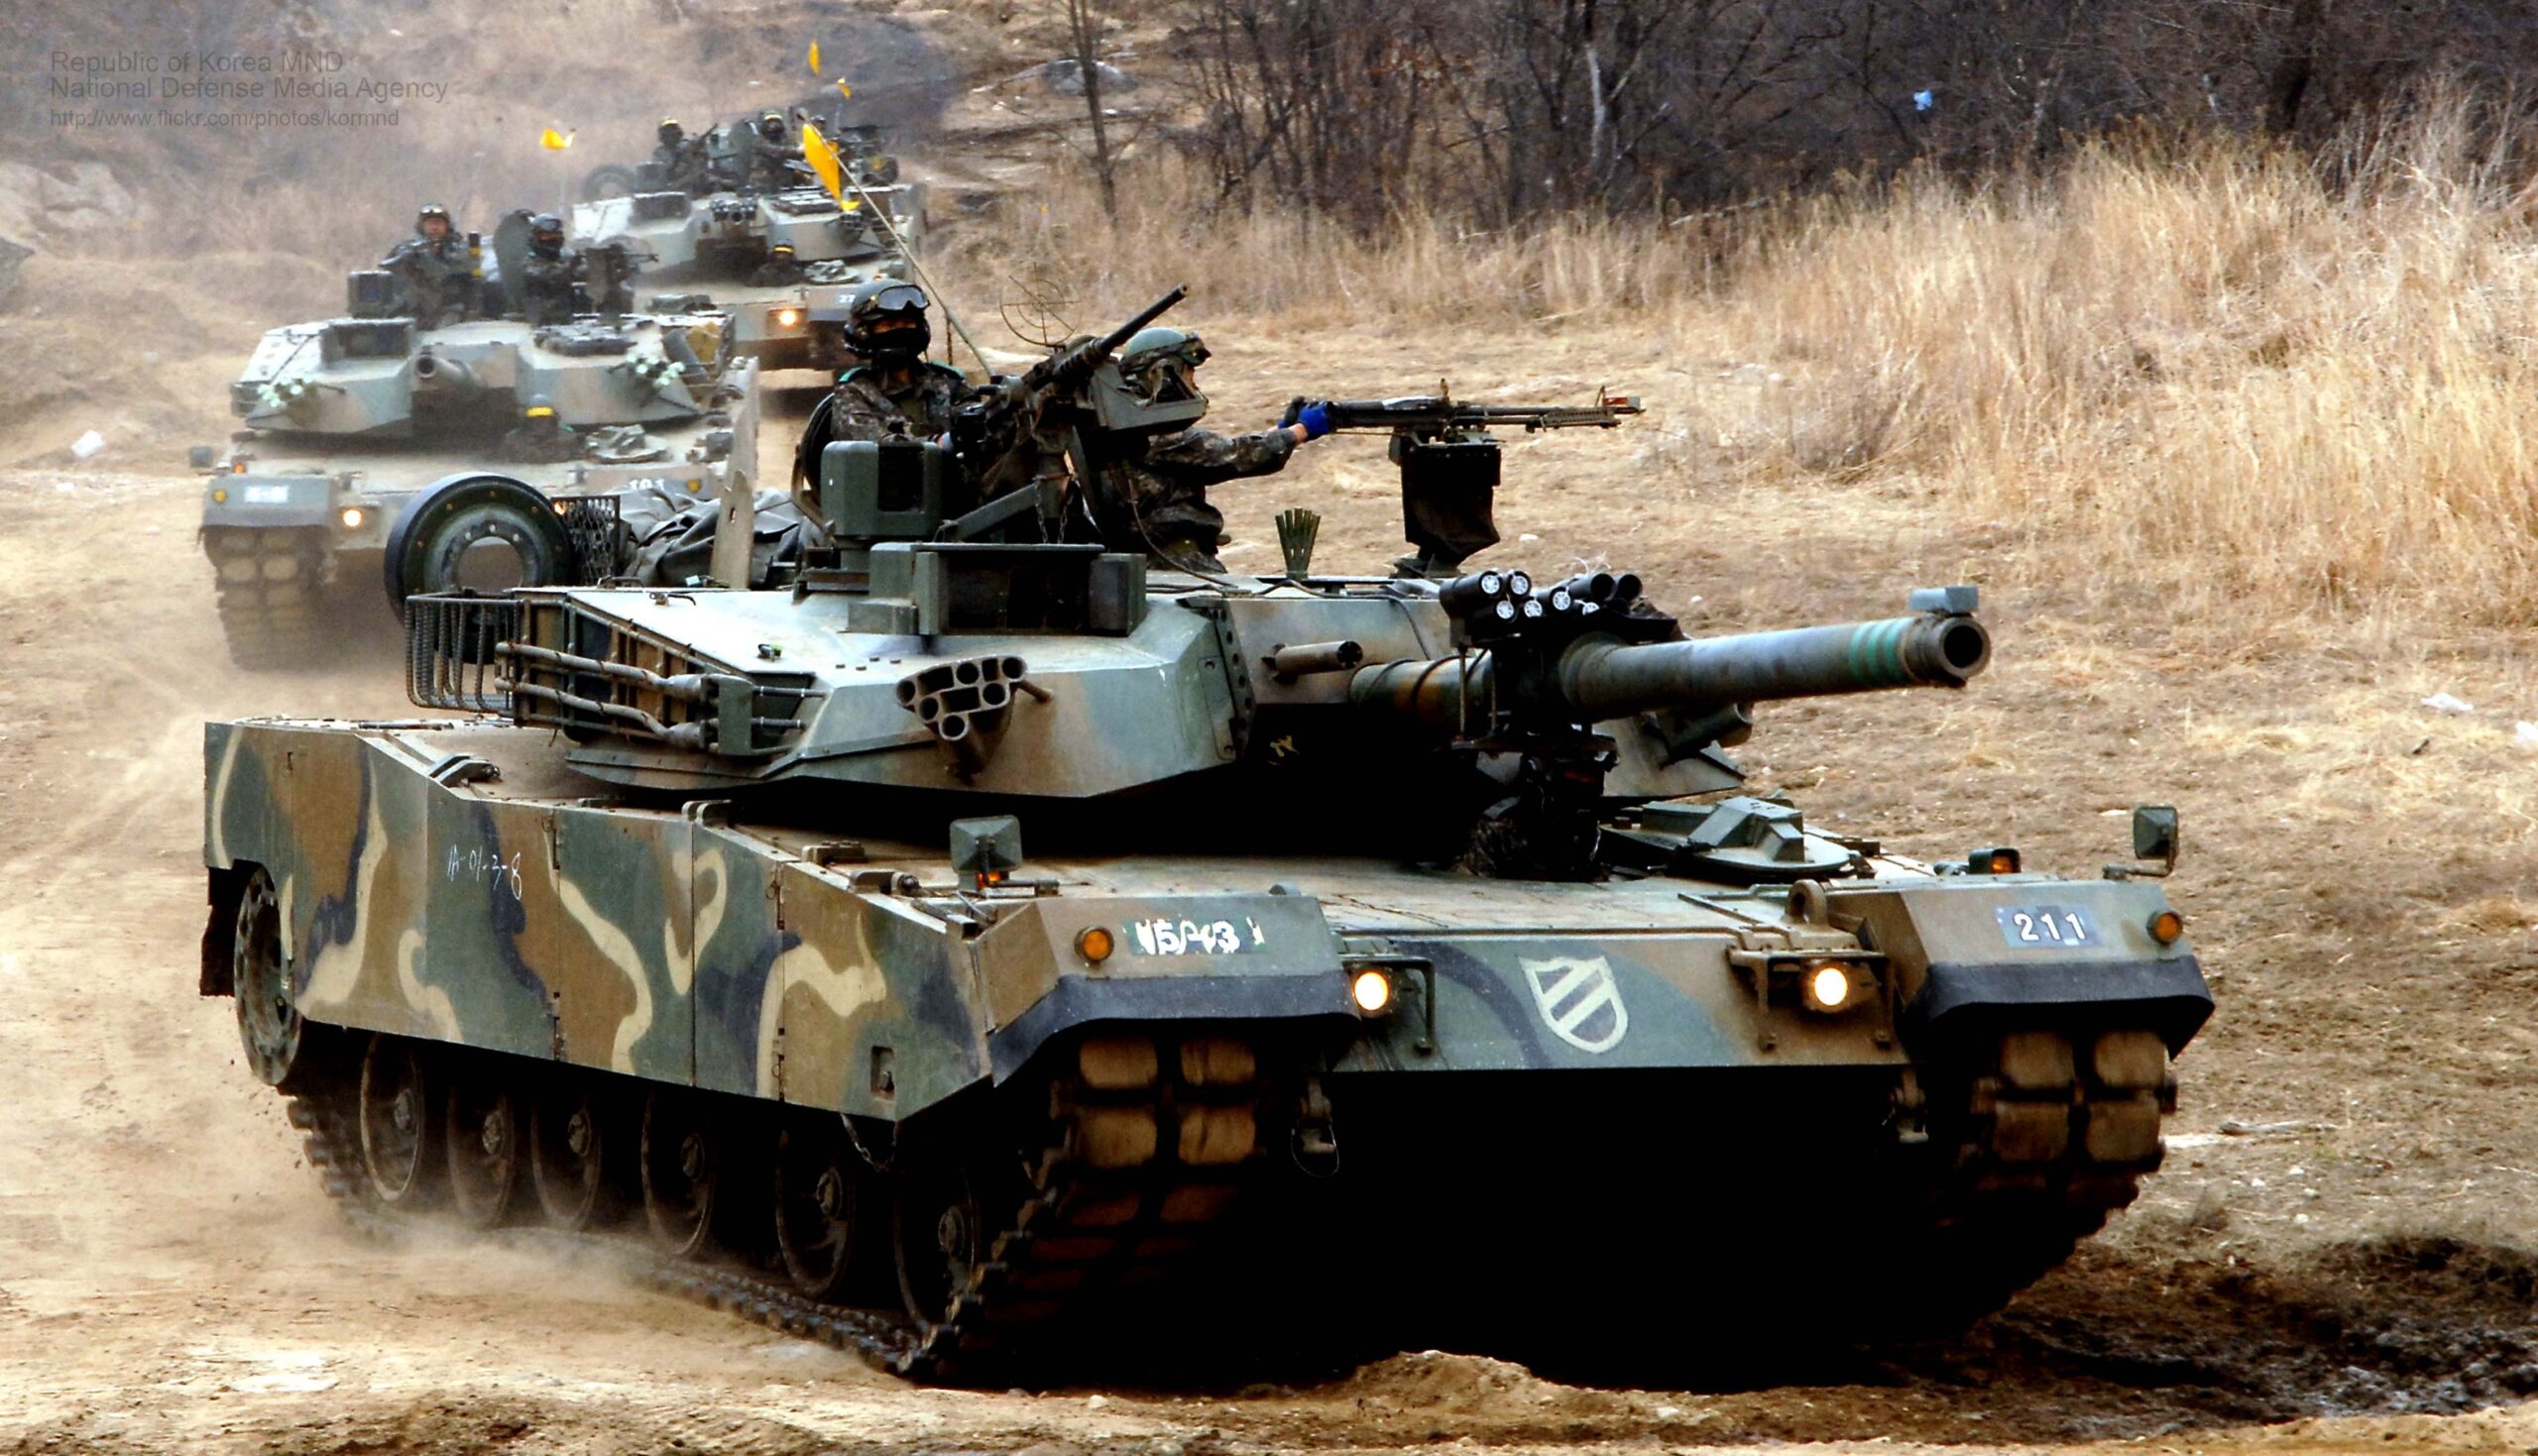 South Korea remains unwilling to provide military aid to Ukraine